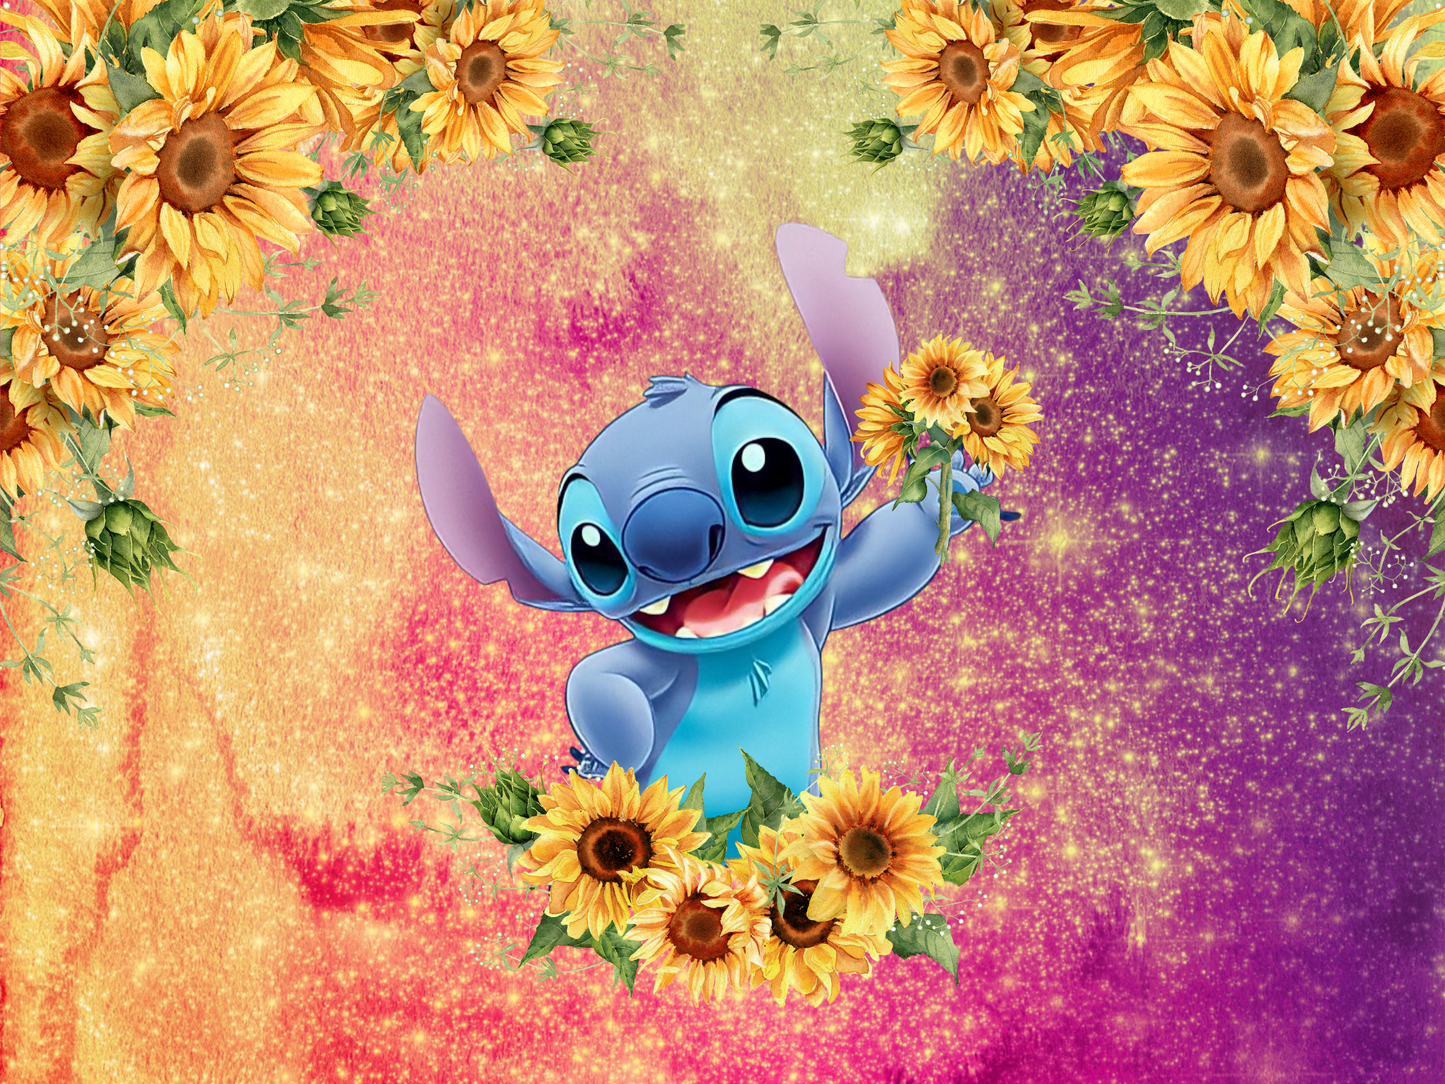 Stitch with Sunflowers Sublimation Print